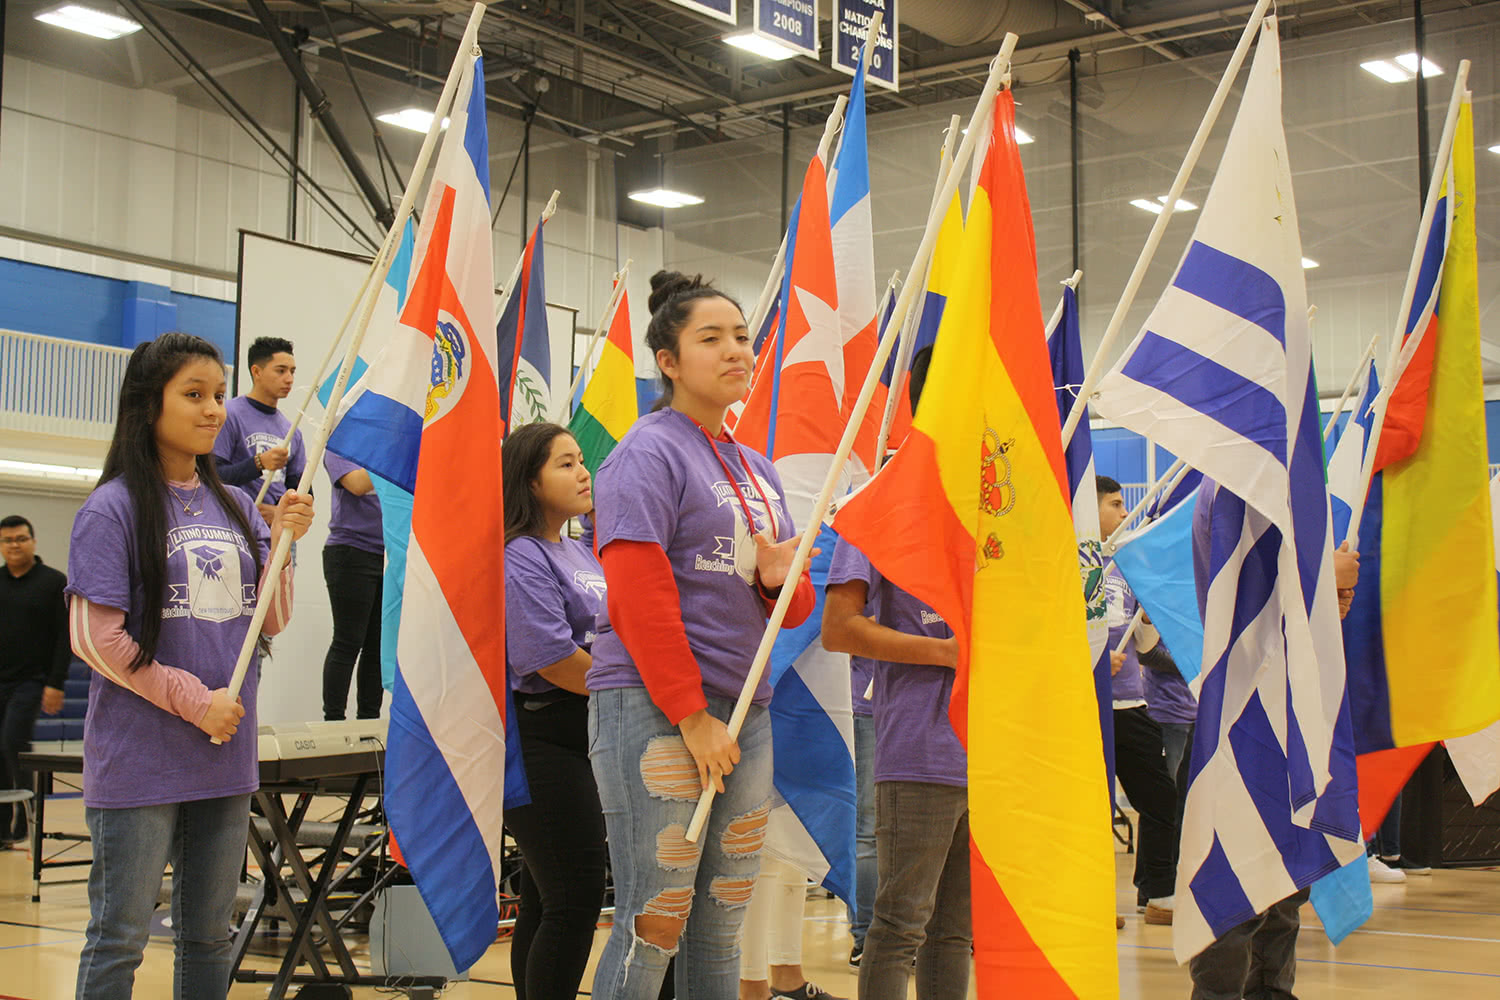 The flag ceremony at the 19th annual Latino Summit